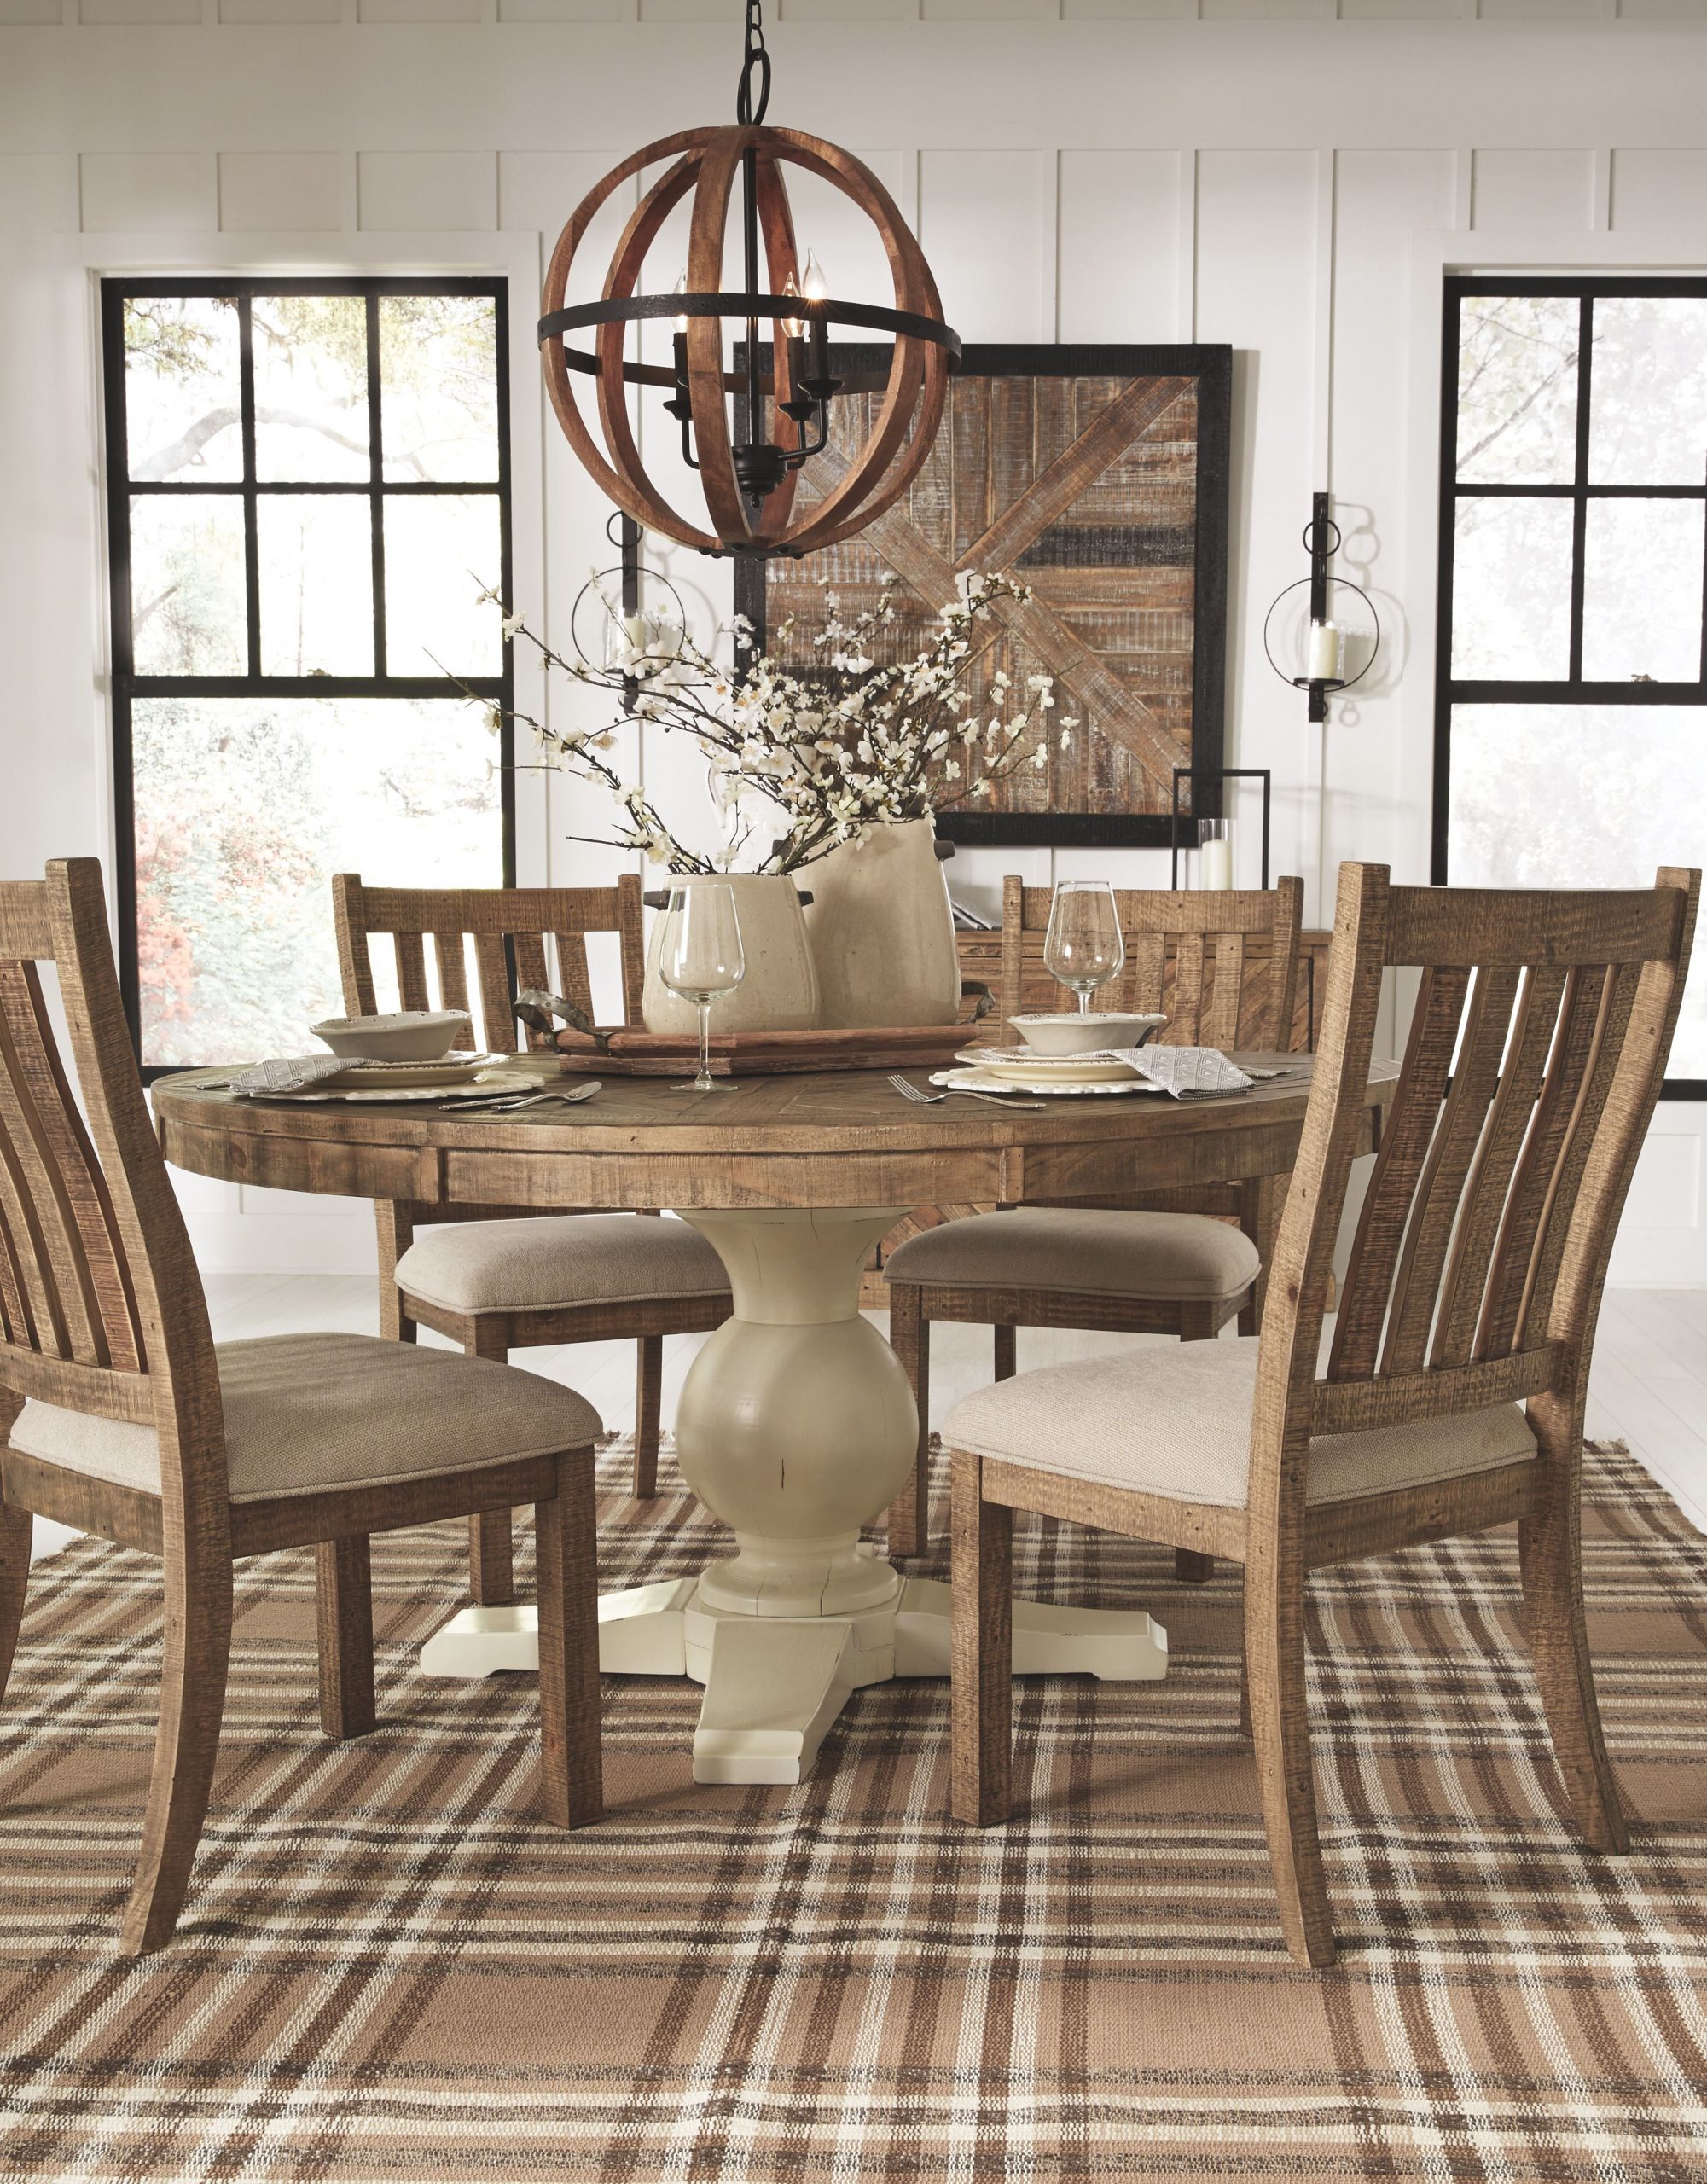 Grindleburg Dining Room Chair Set Of 2 Light Brown inside dimensions 2880 X 3684